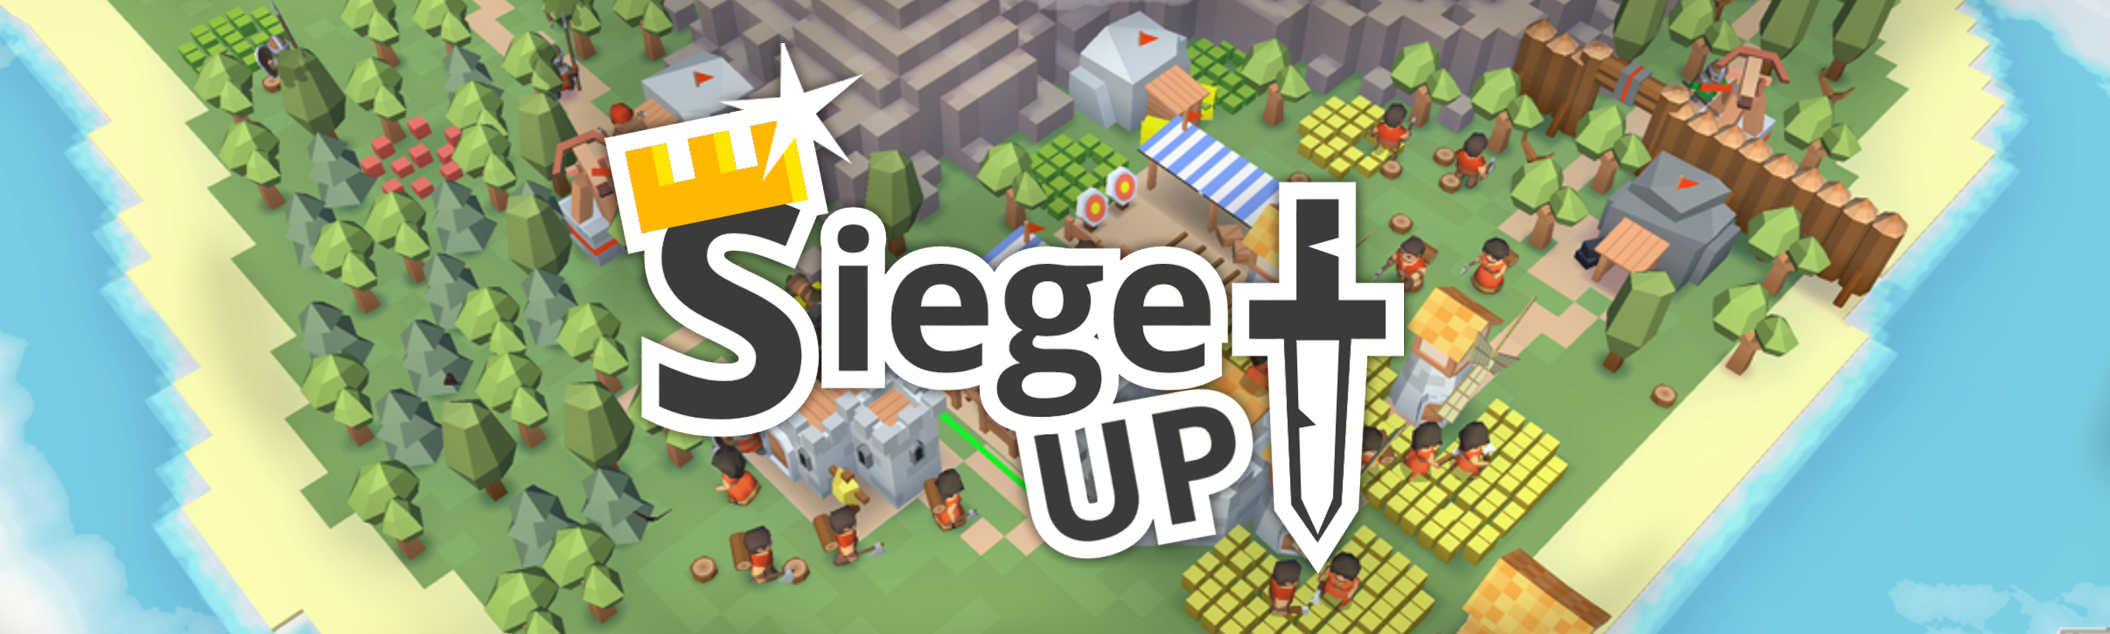 RTS Siege Up! PC Multiplayer PvP Co-op Strategy